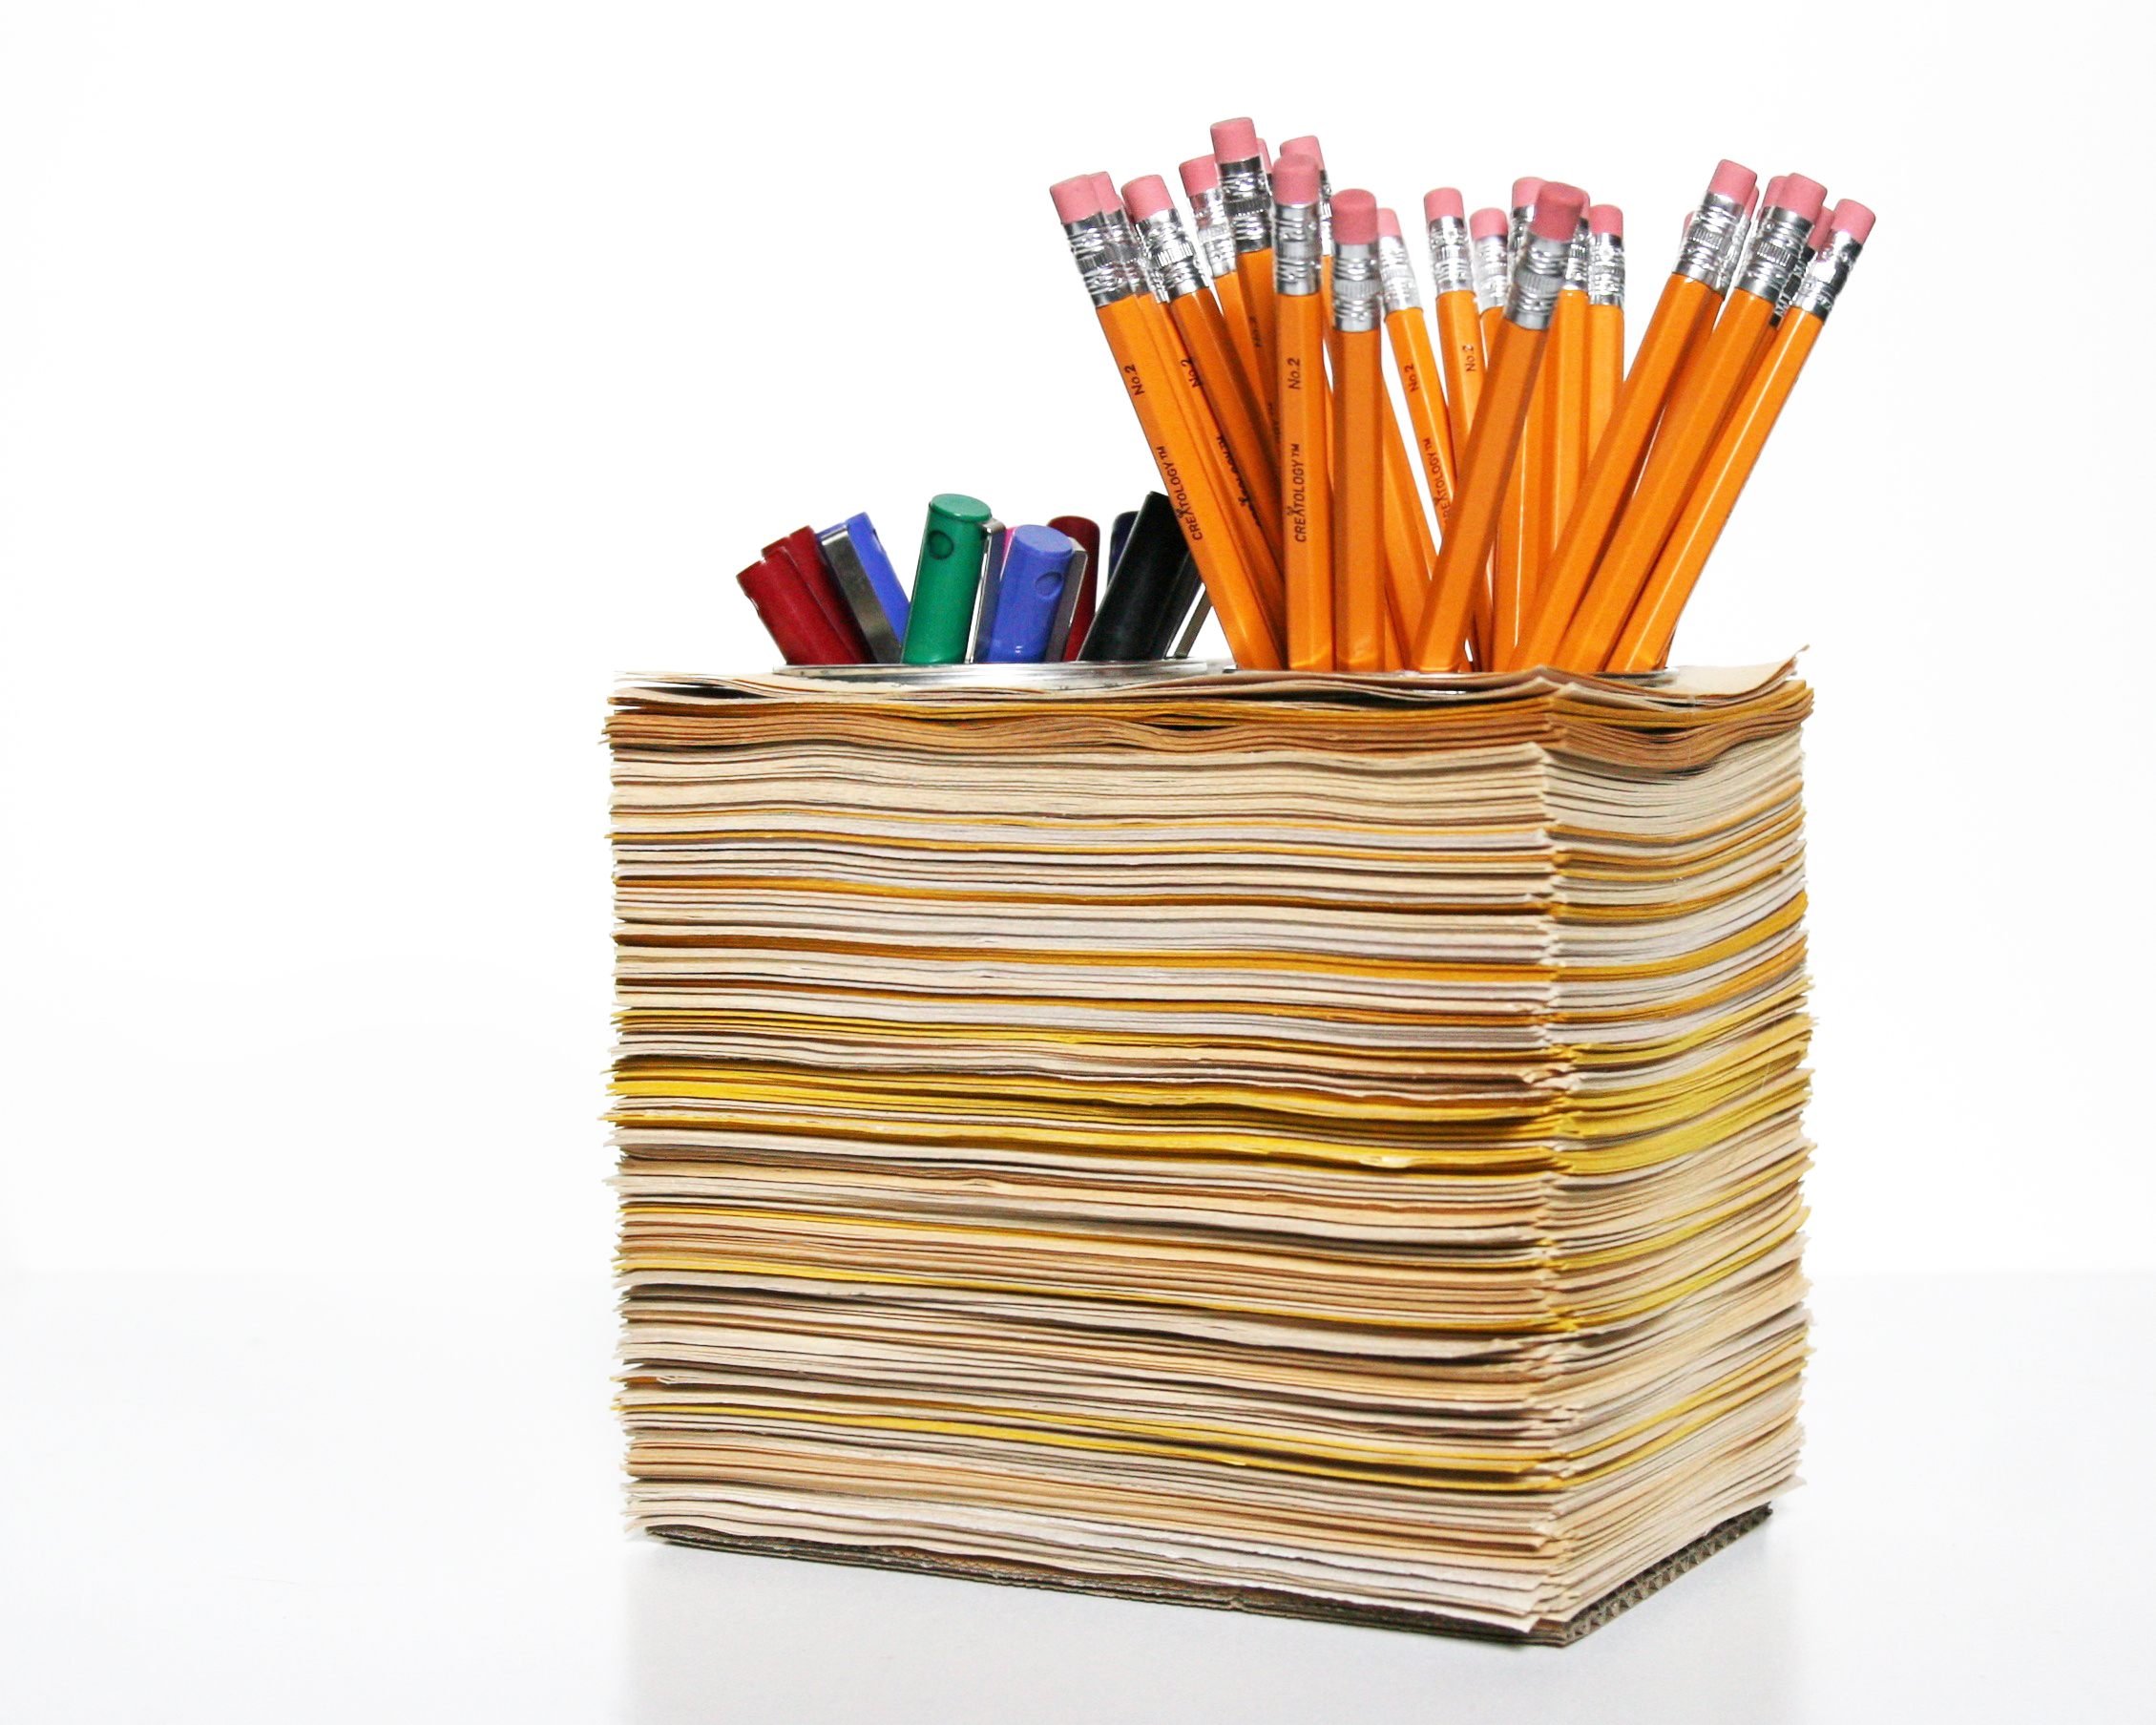 09-book-page-pencil-cups-101.jpg